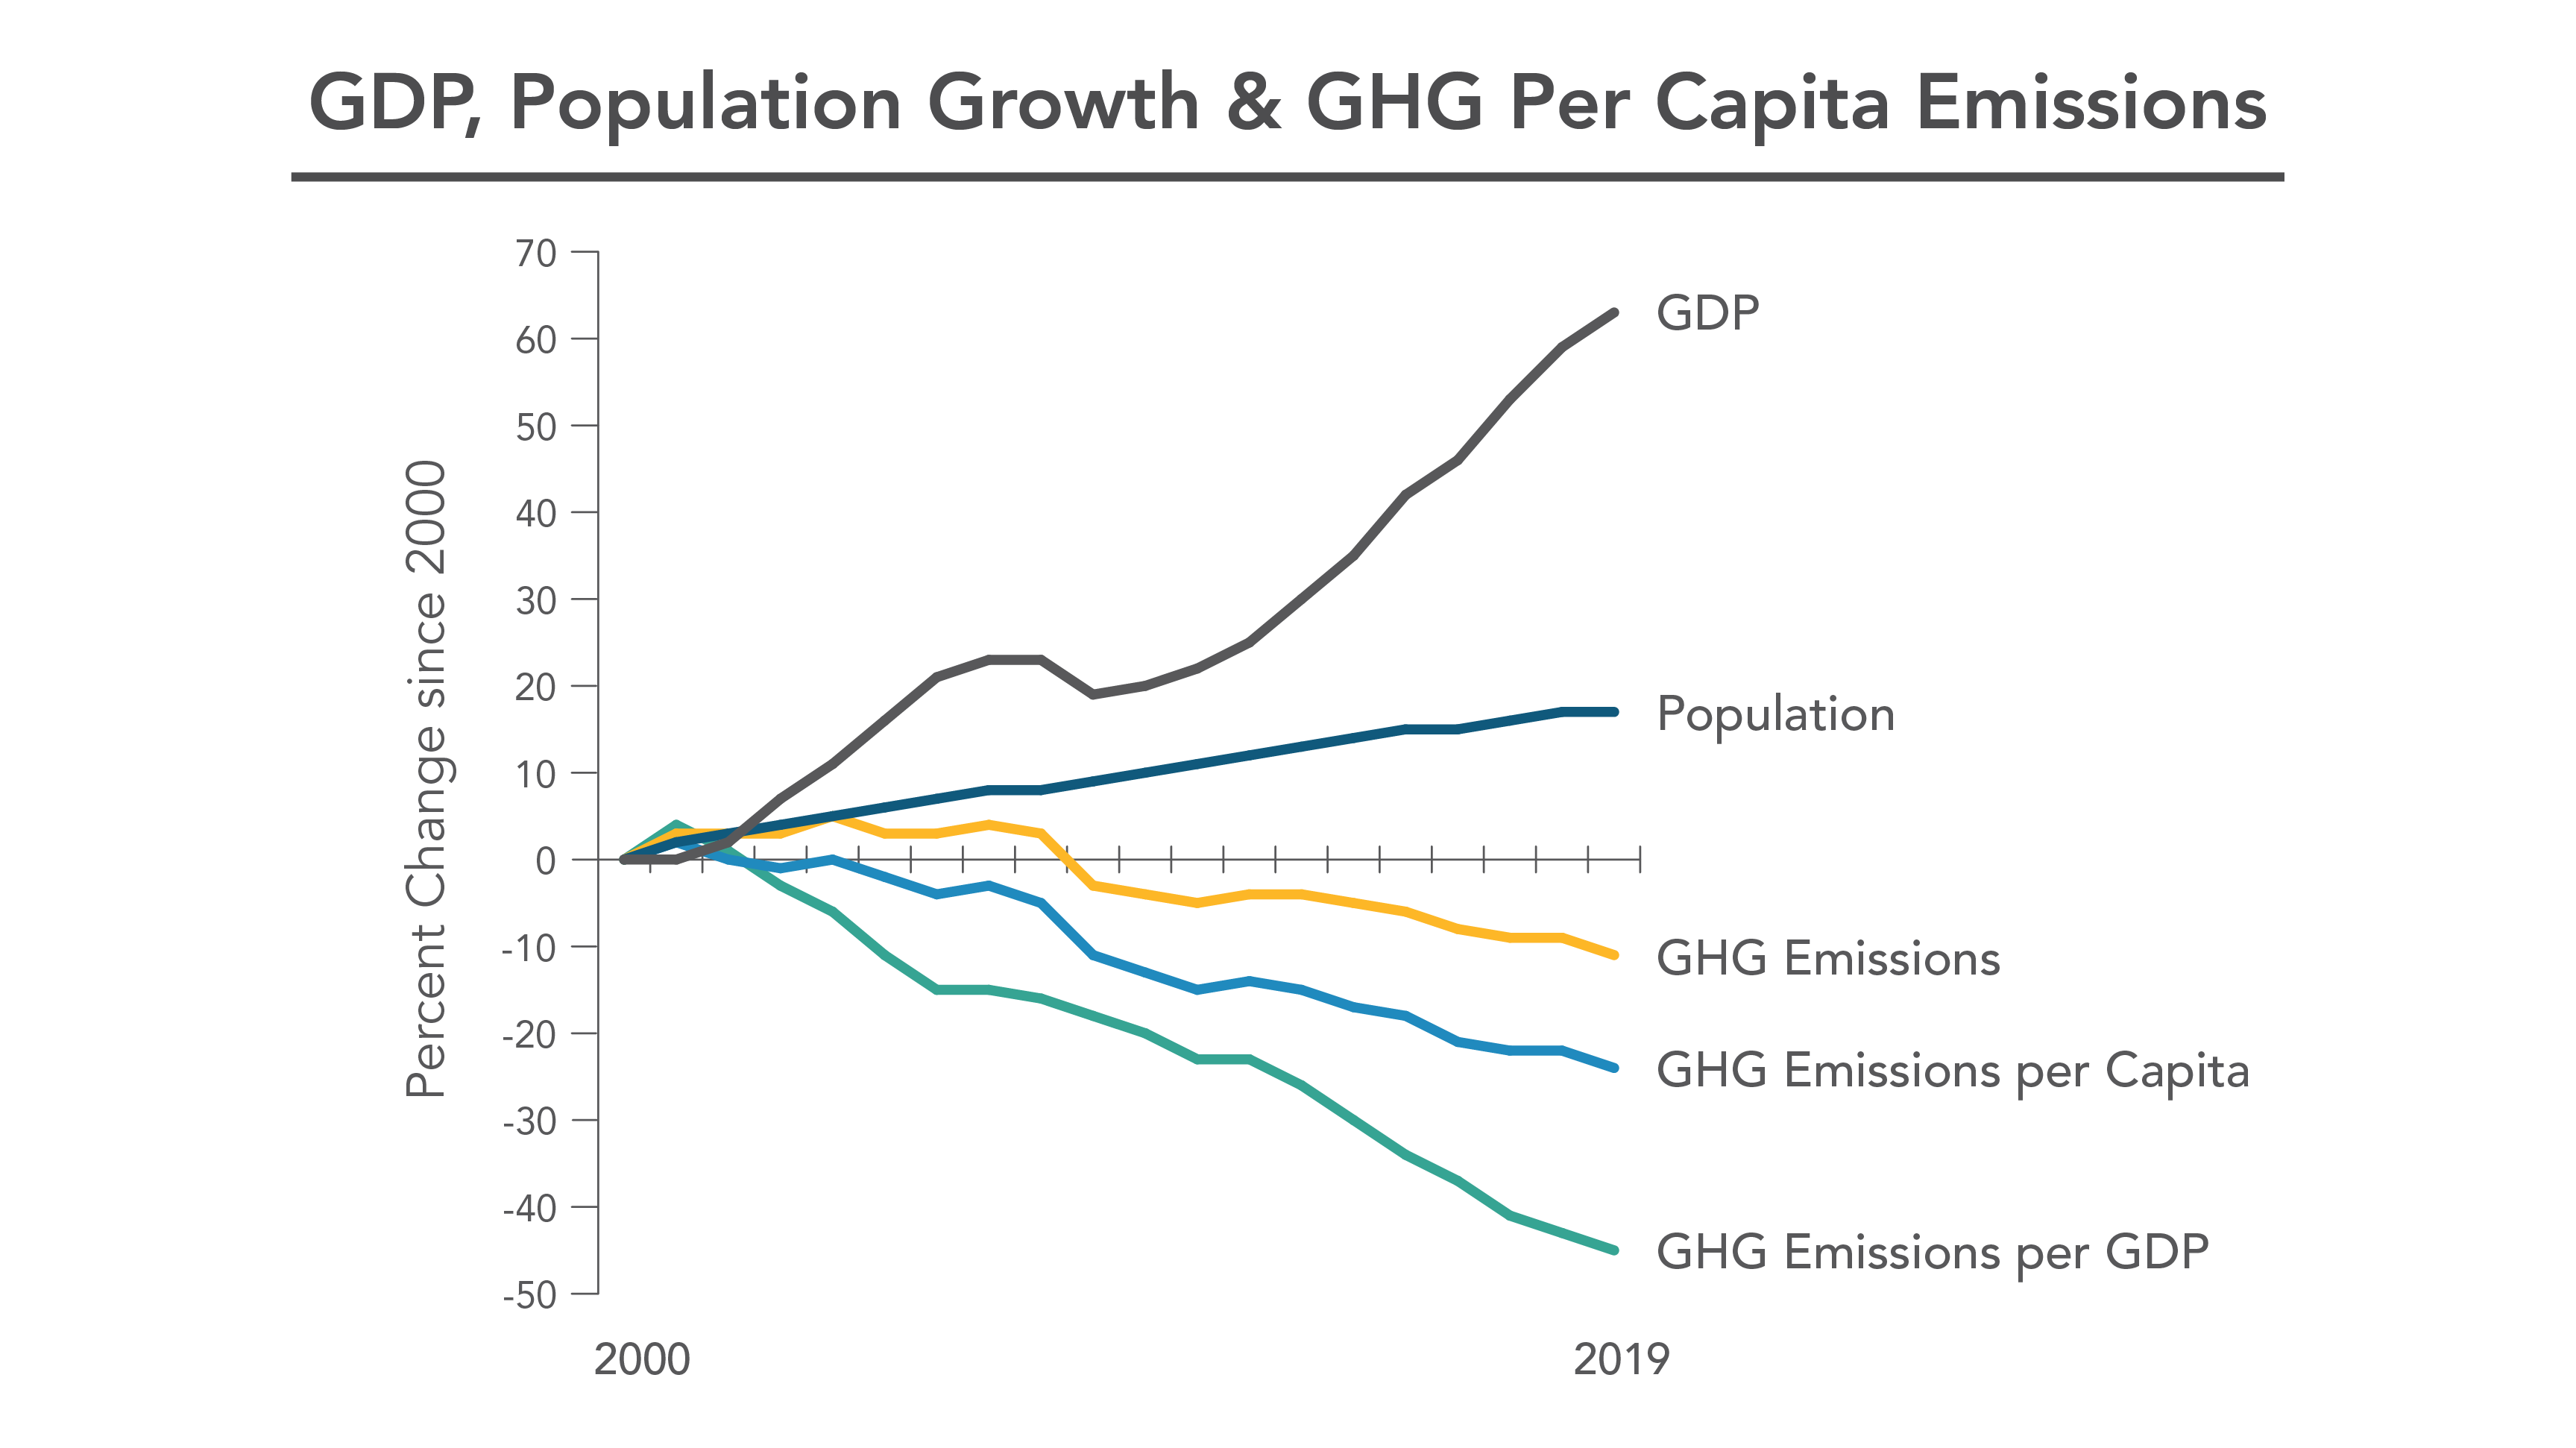 2019 - GHG Inventory line chart showing GDP and population have risen, while GHG emissions, emissions per capita and emissions per GDP have all lowered